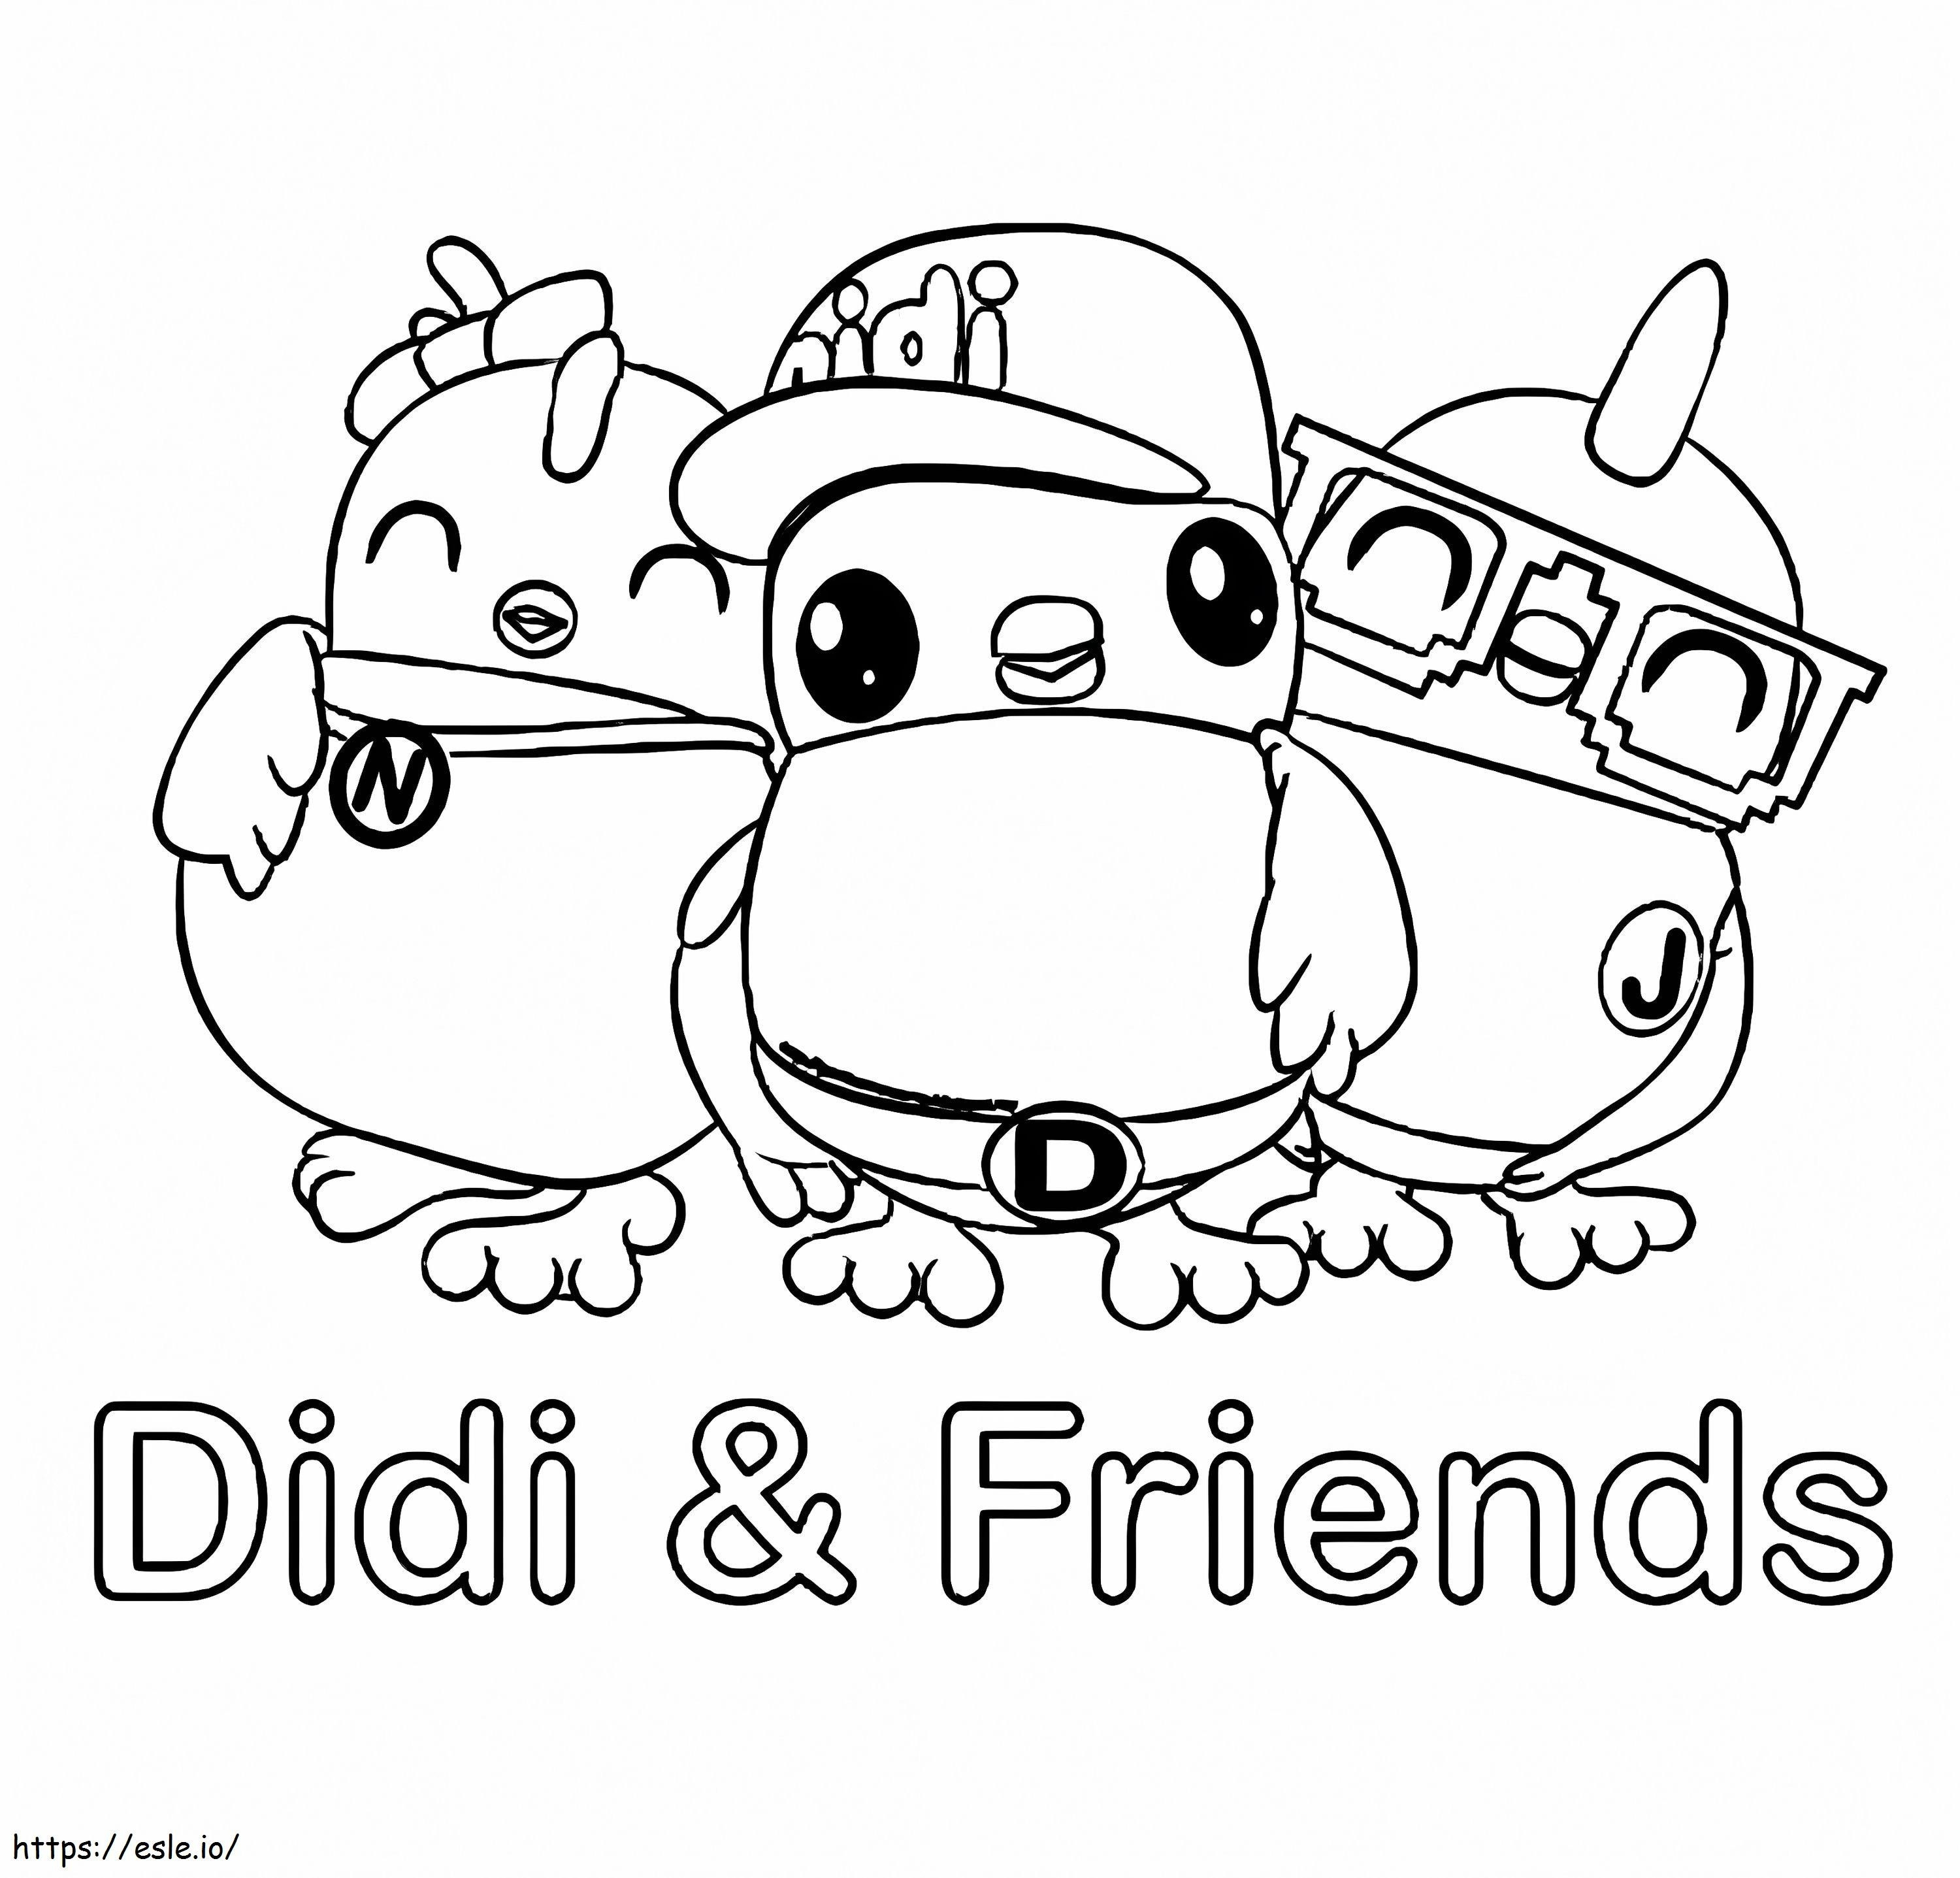 Printable Didi And Friends coloring page